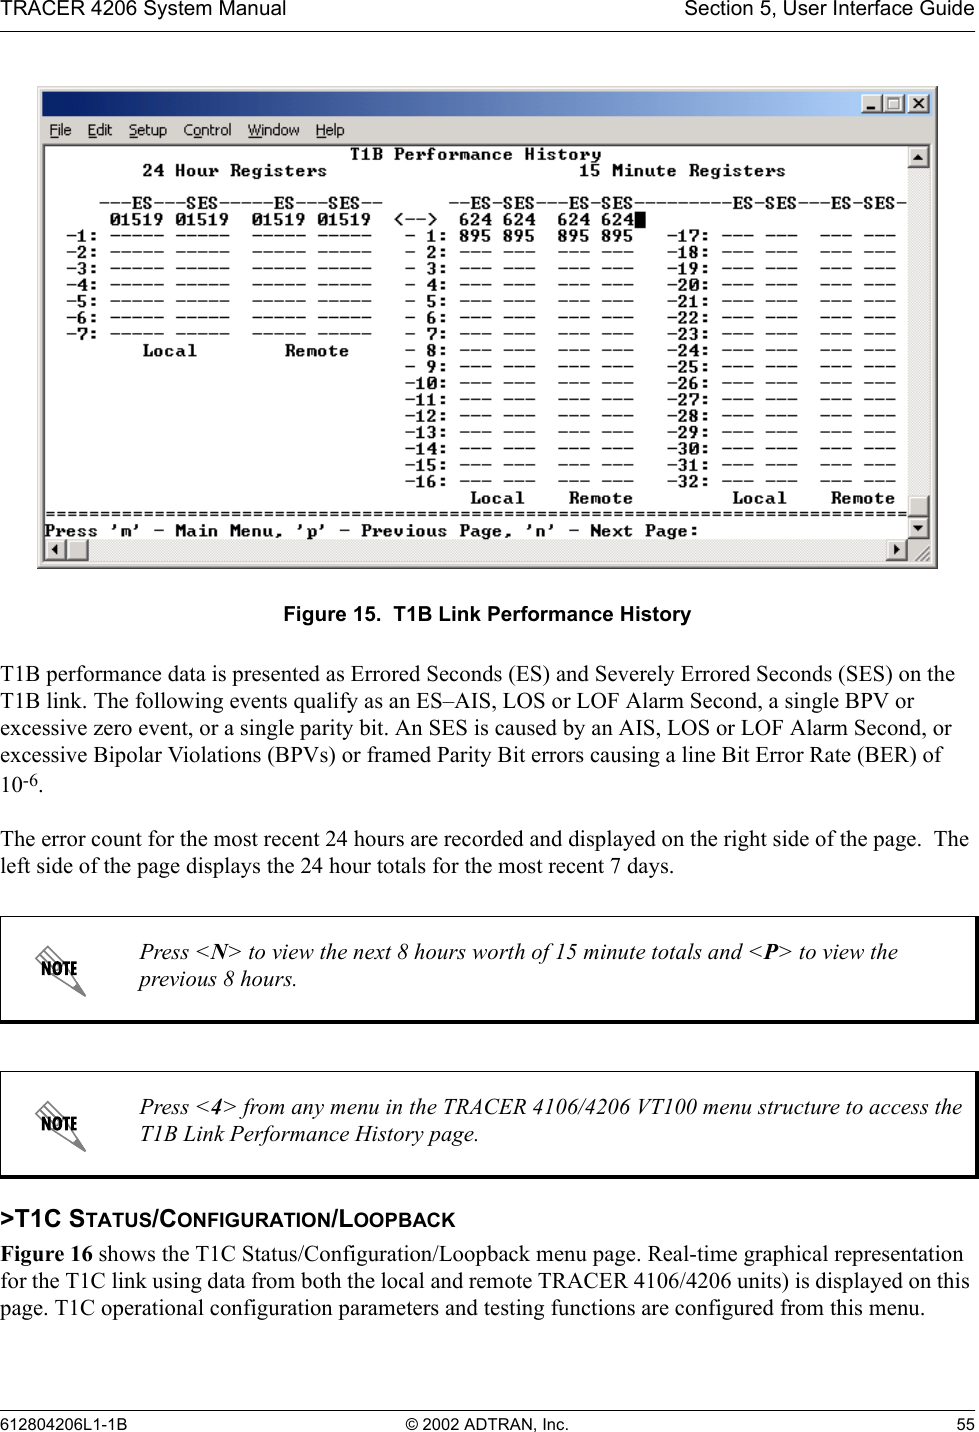 TRACER 4206 System Manual Section 5, User Interface Guide612804206L1-1B © 2002 ADTRAN, Inc. 55Figure 15.  T1B Link Performance HistoryT1B performance data is presented as Errored Seconds (ES) and Severely Errored Seconds (SES) on the T1B link. The following events qualify as an ES–AIS, LOS or LOF Alarm Second, a single BPV or excessive zero event, or a single parity bit. An SES is caused by an AIS, LOS or LOF Alarm Second, or excessive Bipolar Violations (BPVs) or framed Parity Bit errors causing a line Bit Error Rate (BER) of 10-6.The error count for the most recent 24 hours are recorded and displayed on the right side of the page.  The left side of the page displays the 24 hour totals for the most recent 7 days.&gt;T1C STATUS/CONFIGURATION/LOOPBACKFigure 16 shows the T1C Status/Configuration/Loopback menu page. Real-time graphical representation for the T1C link using data from both the local and remote TRACER 4106/4206 units) is displayed on this page. T1C operational configuration parameters and testing functions are configured from this menu.Press &lt;N&gt; to view the next 8 hours worth of 15 minute totals and &lt;P&gt; to view the previous 8 hours.Press &lt;4&gt; from any menu in the TRACER 4106/4206 VT100 menu structure to access the T1B Link Performance History page.